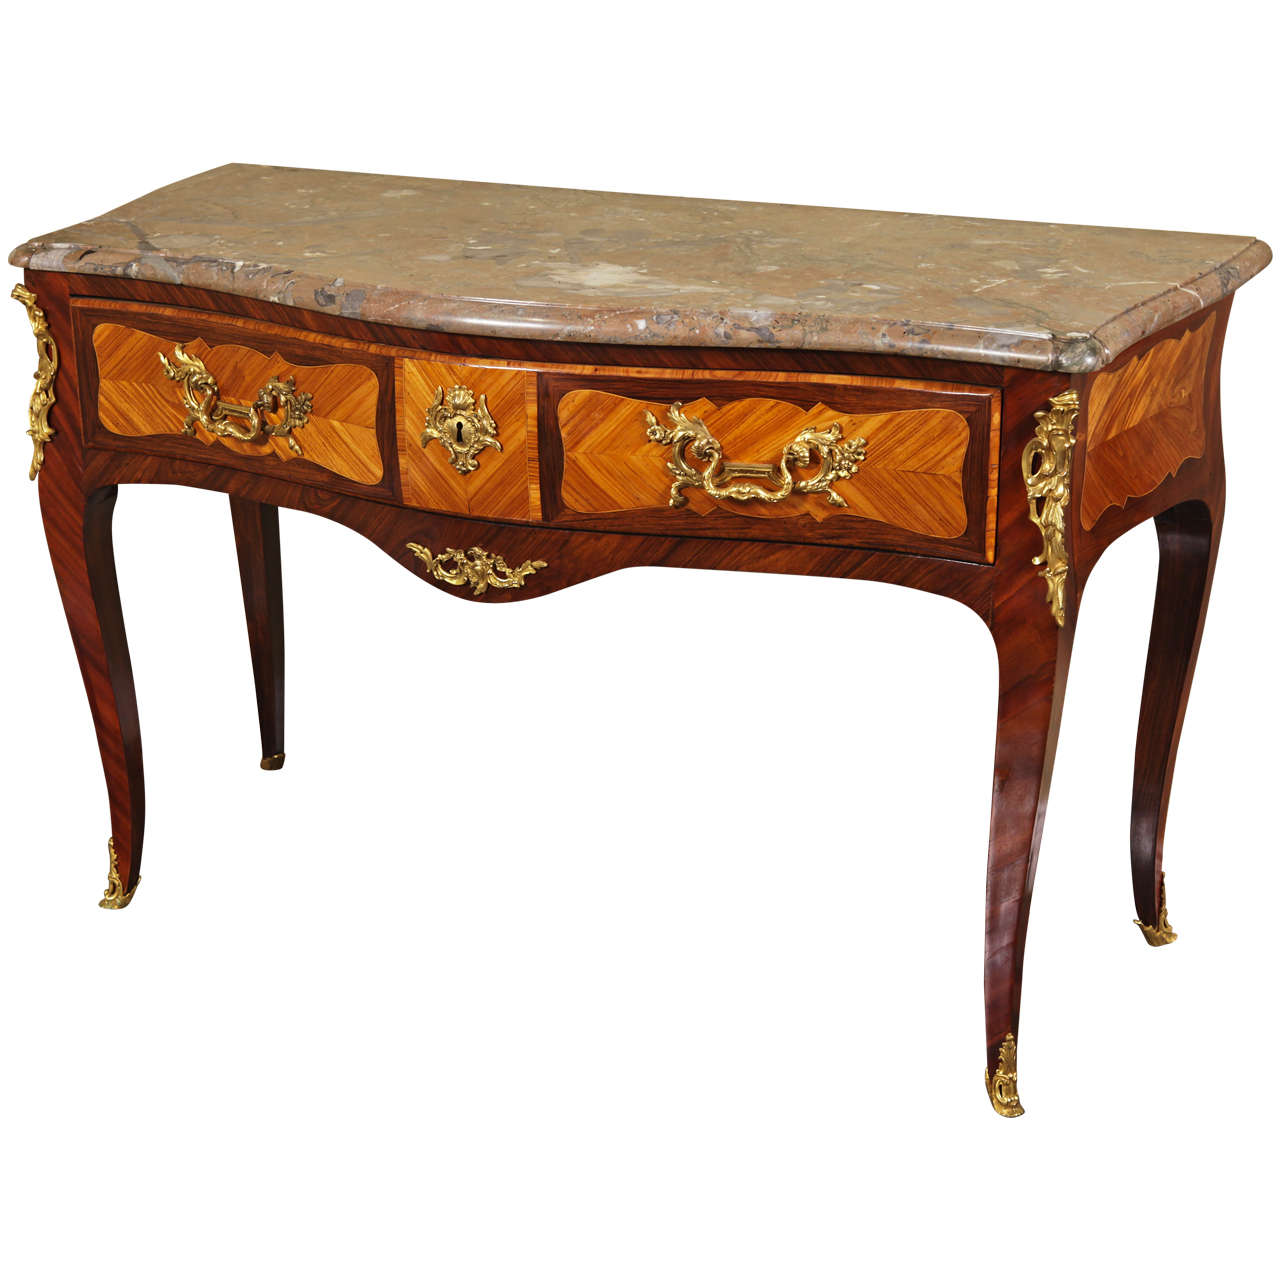 A Late 18th to Early 19th Century French Louis XV Console For Sale